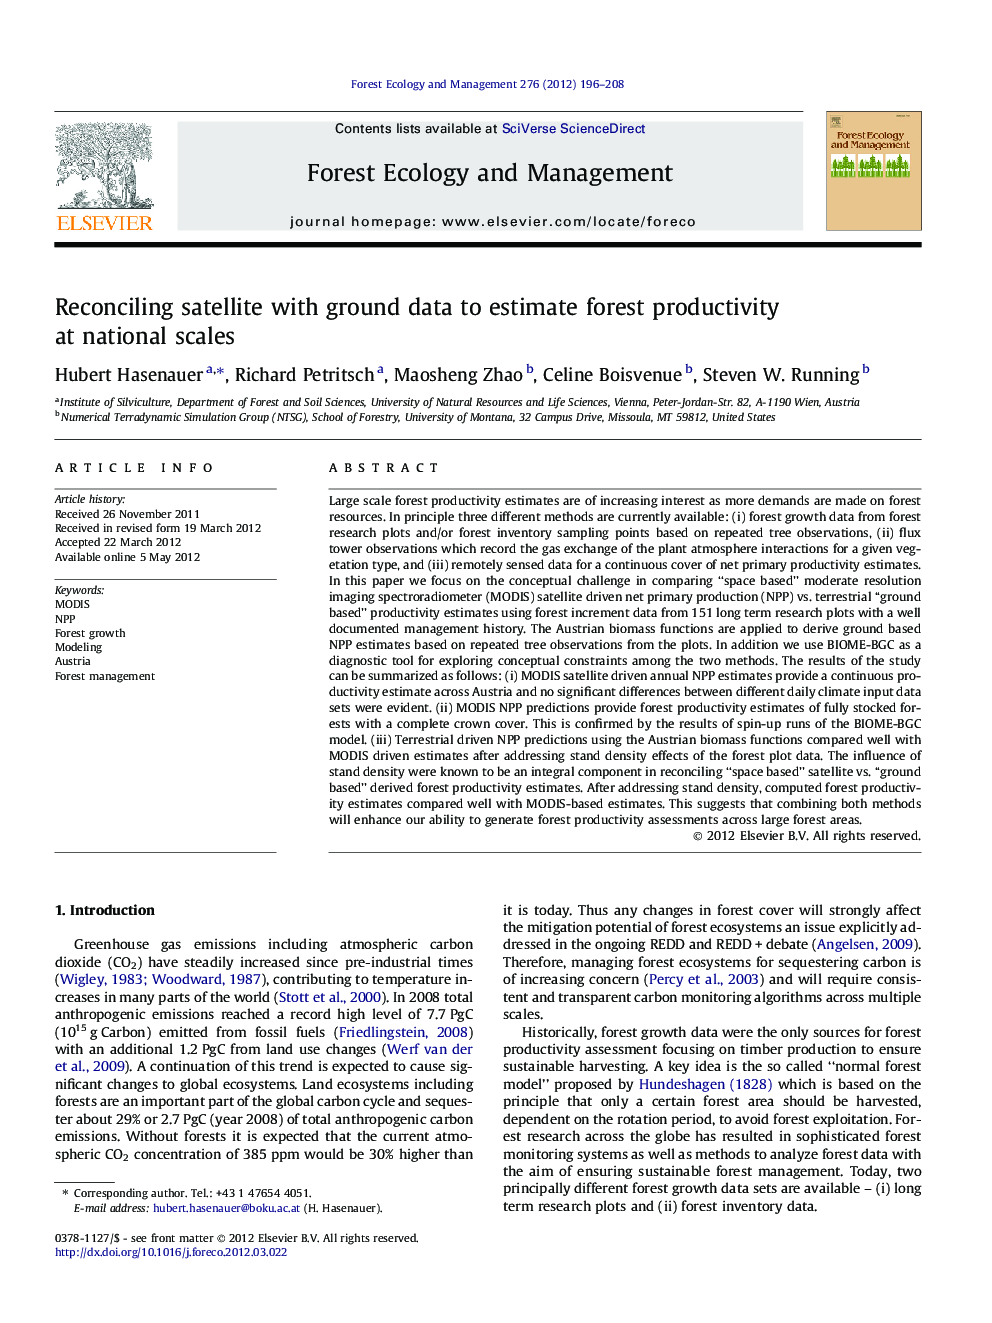 Reconciling satellite with ground data to estimate forest productivity at national scales